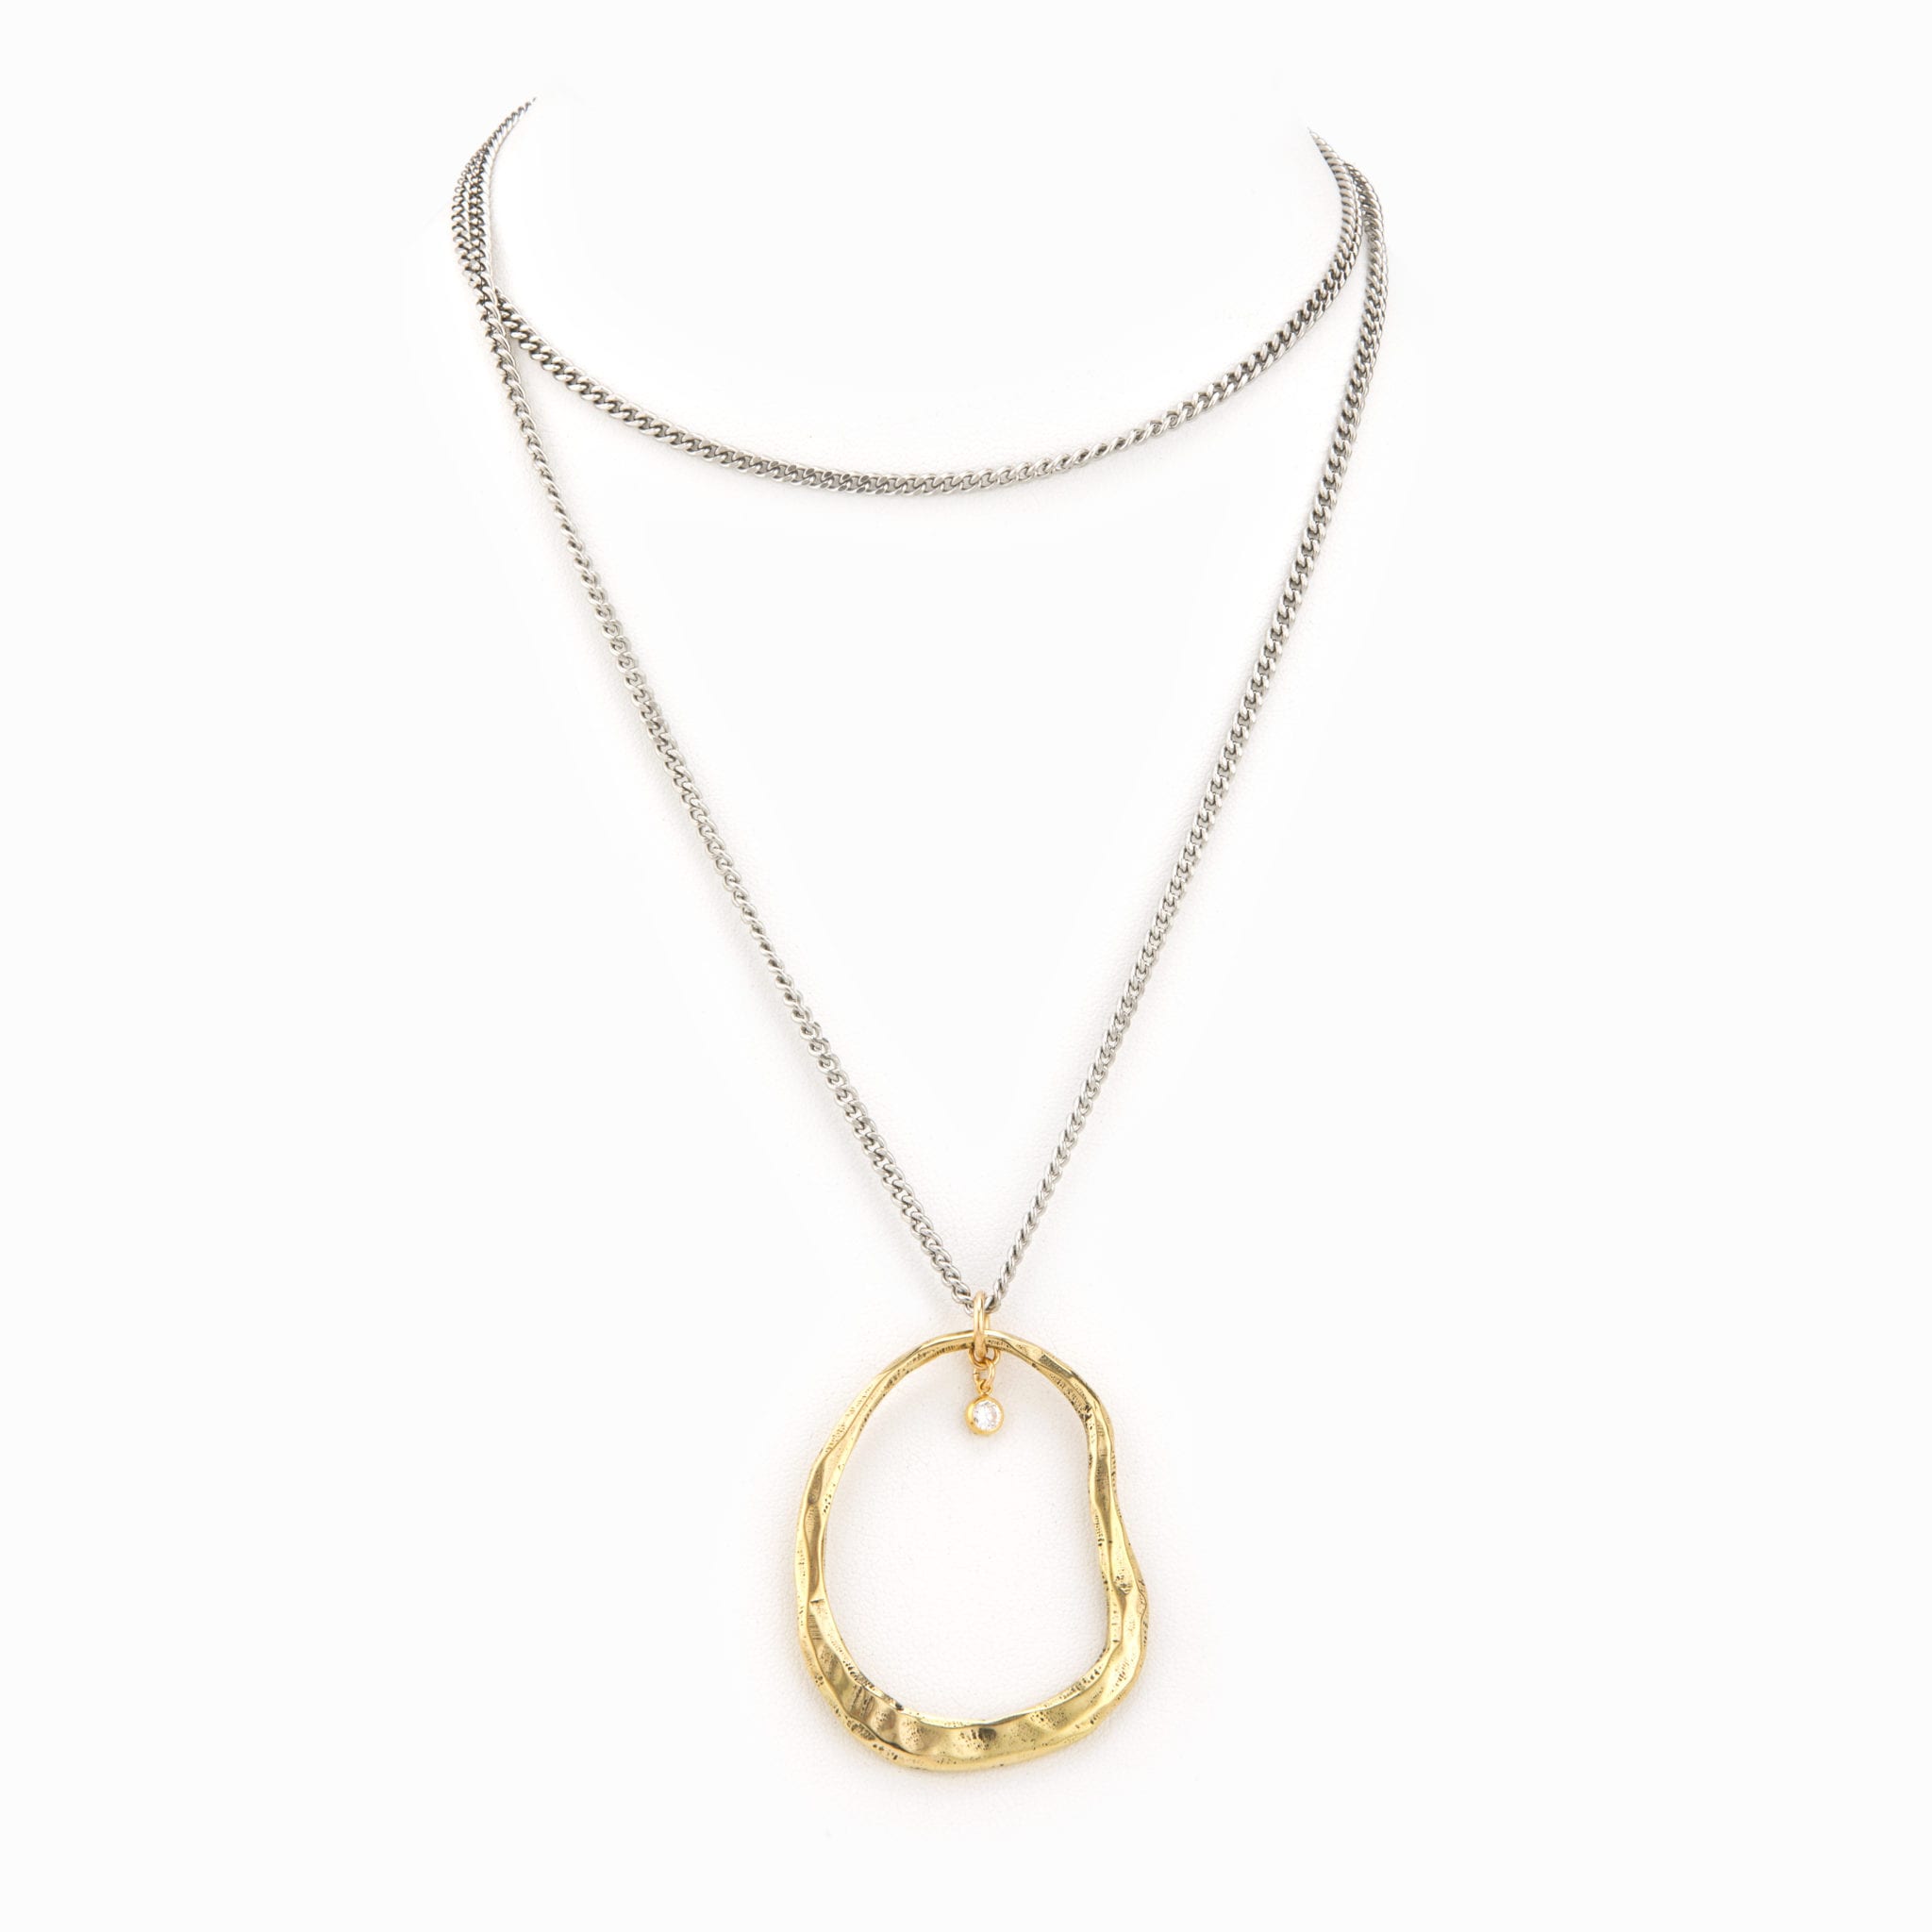 Flat silver chain necklace with gold organic circle charm and crystal detail.